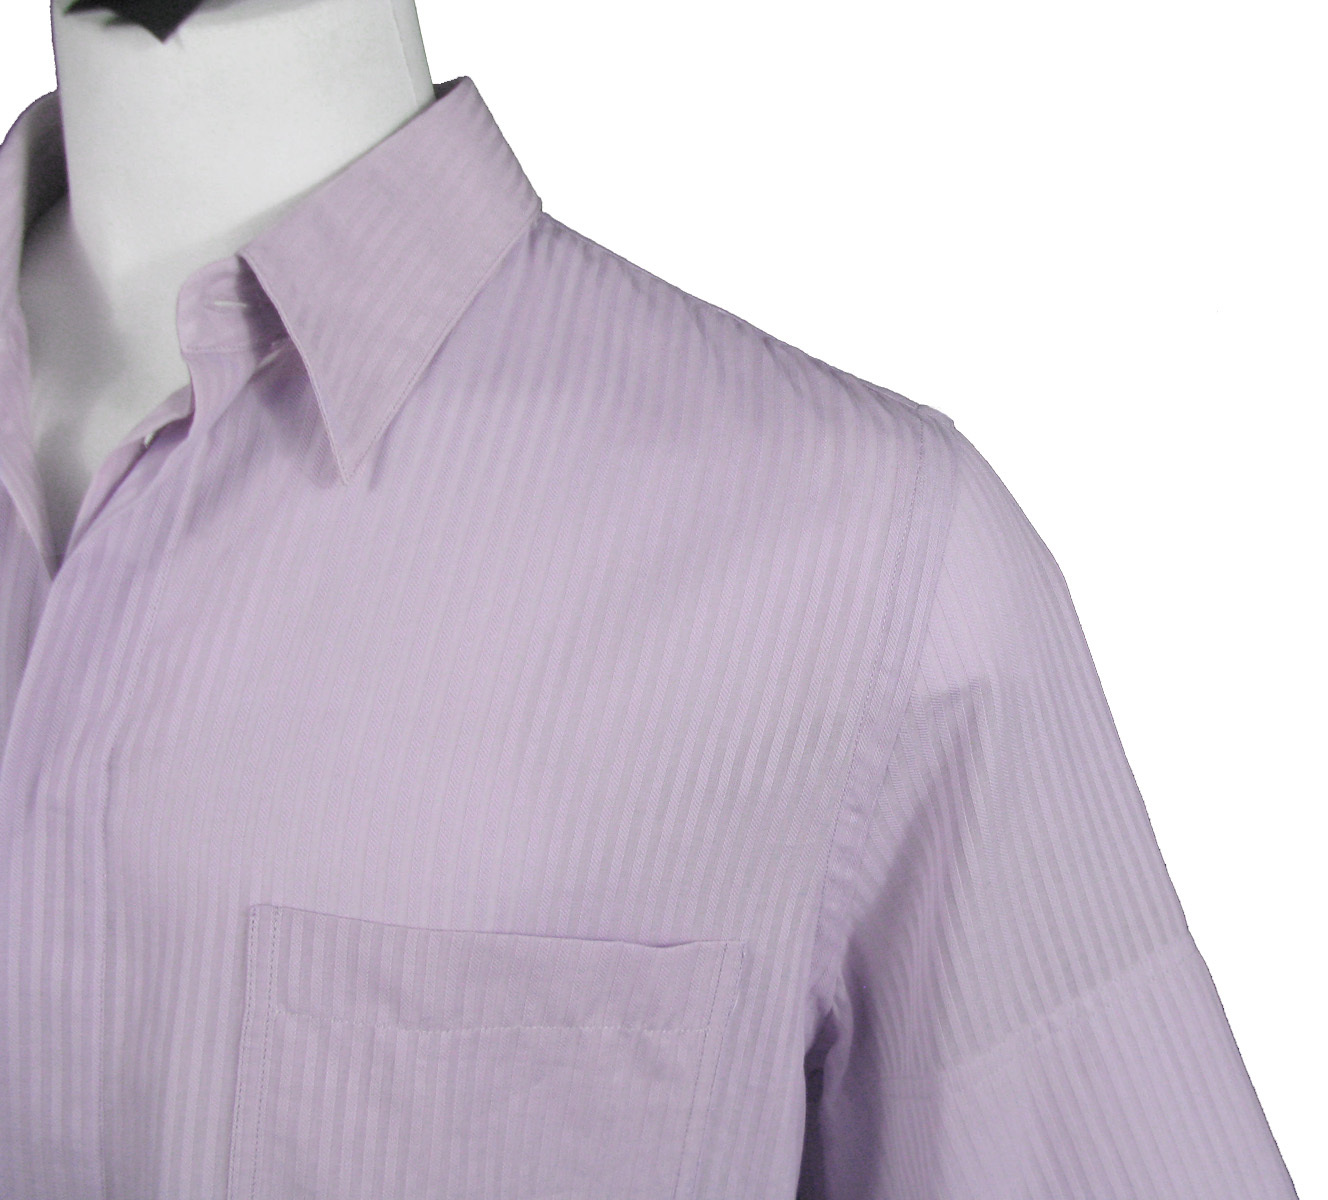 NEW $630 Gianni Versace Couture Sheer Short Sleeve Camp Style Shirt 42 e 52 Larg - $179.99